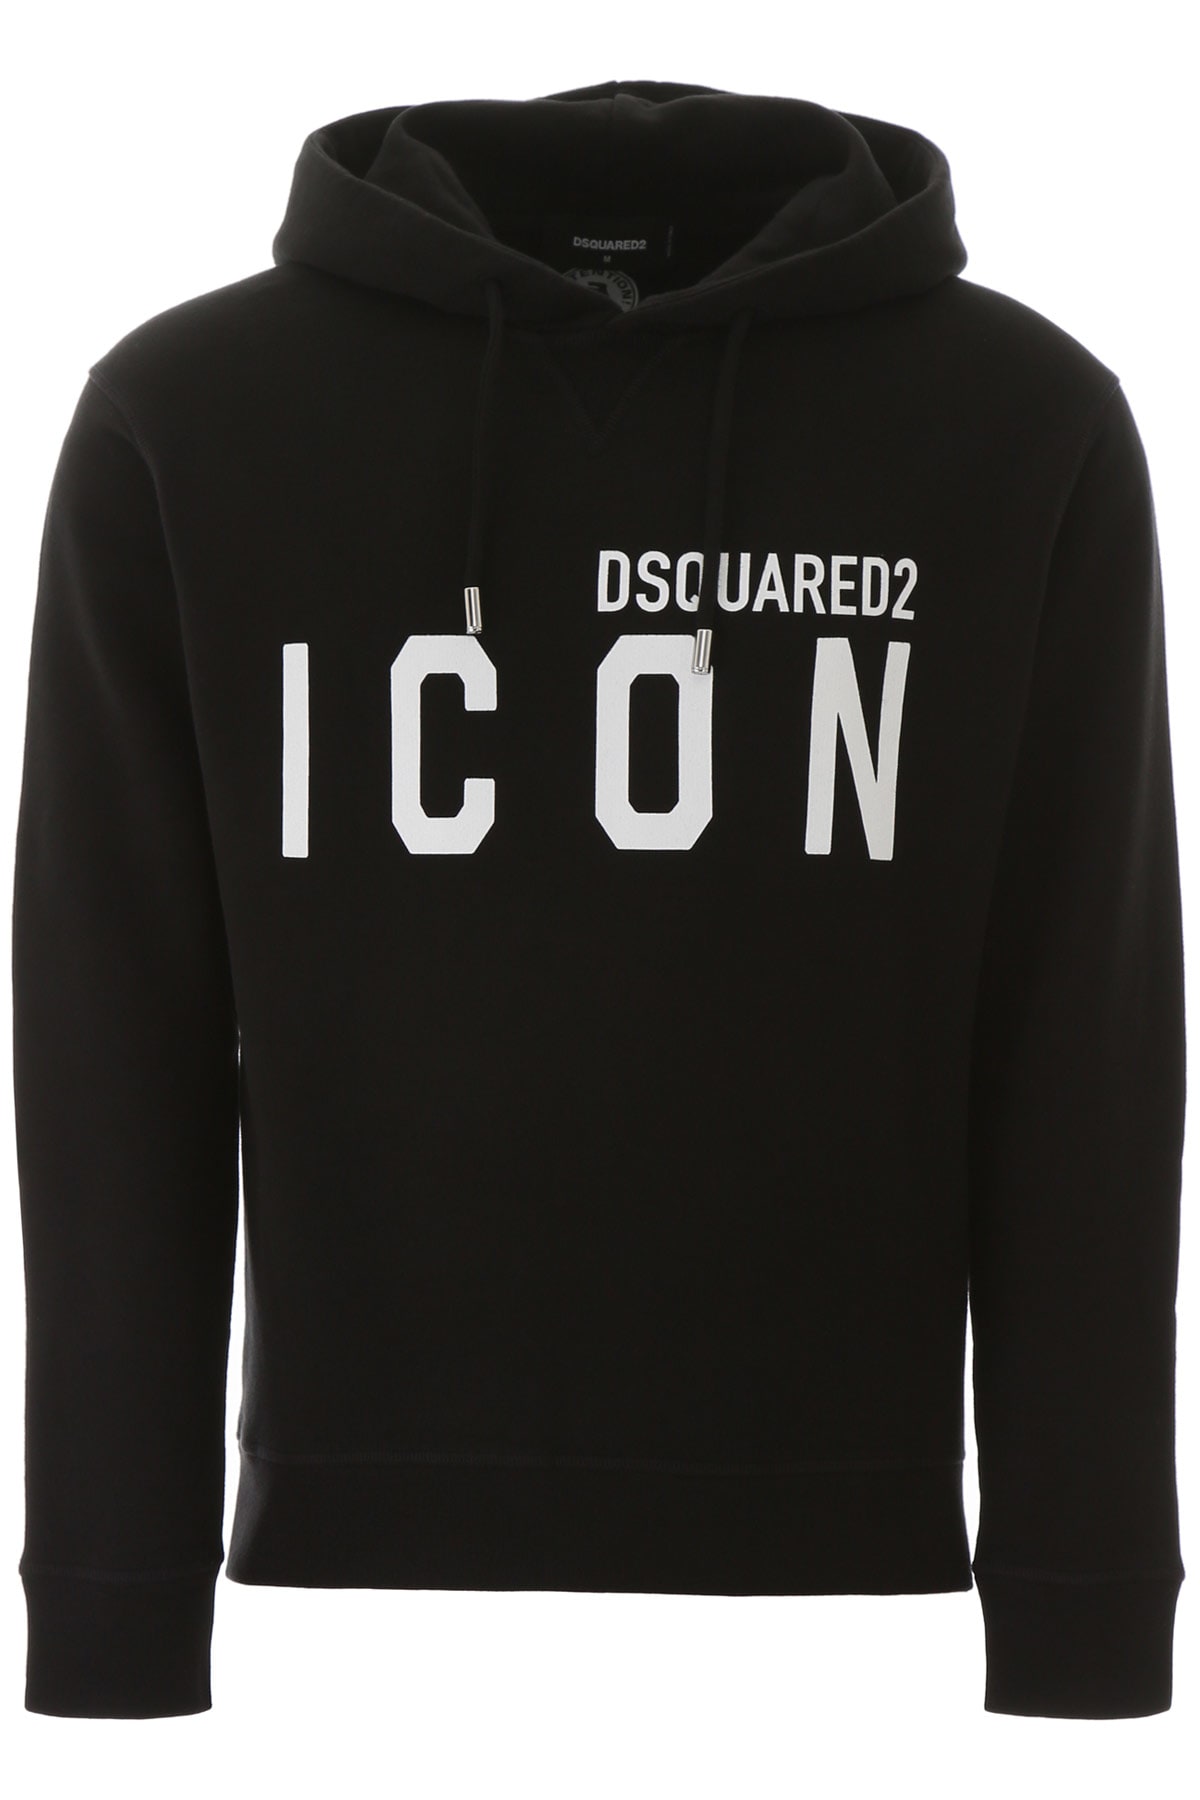 DSQUARED2 ICON HOODIE,11205166